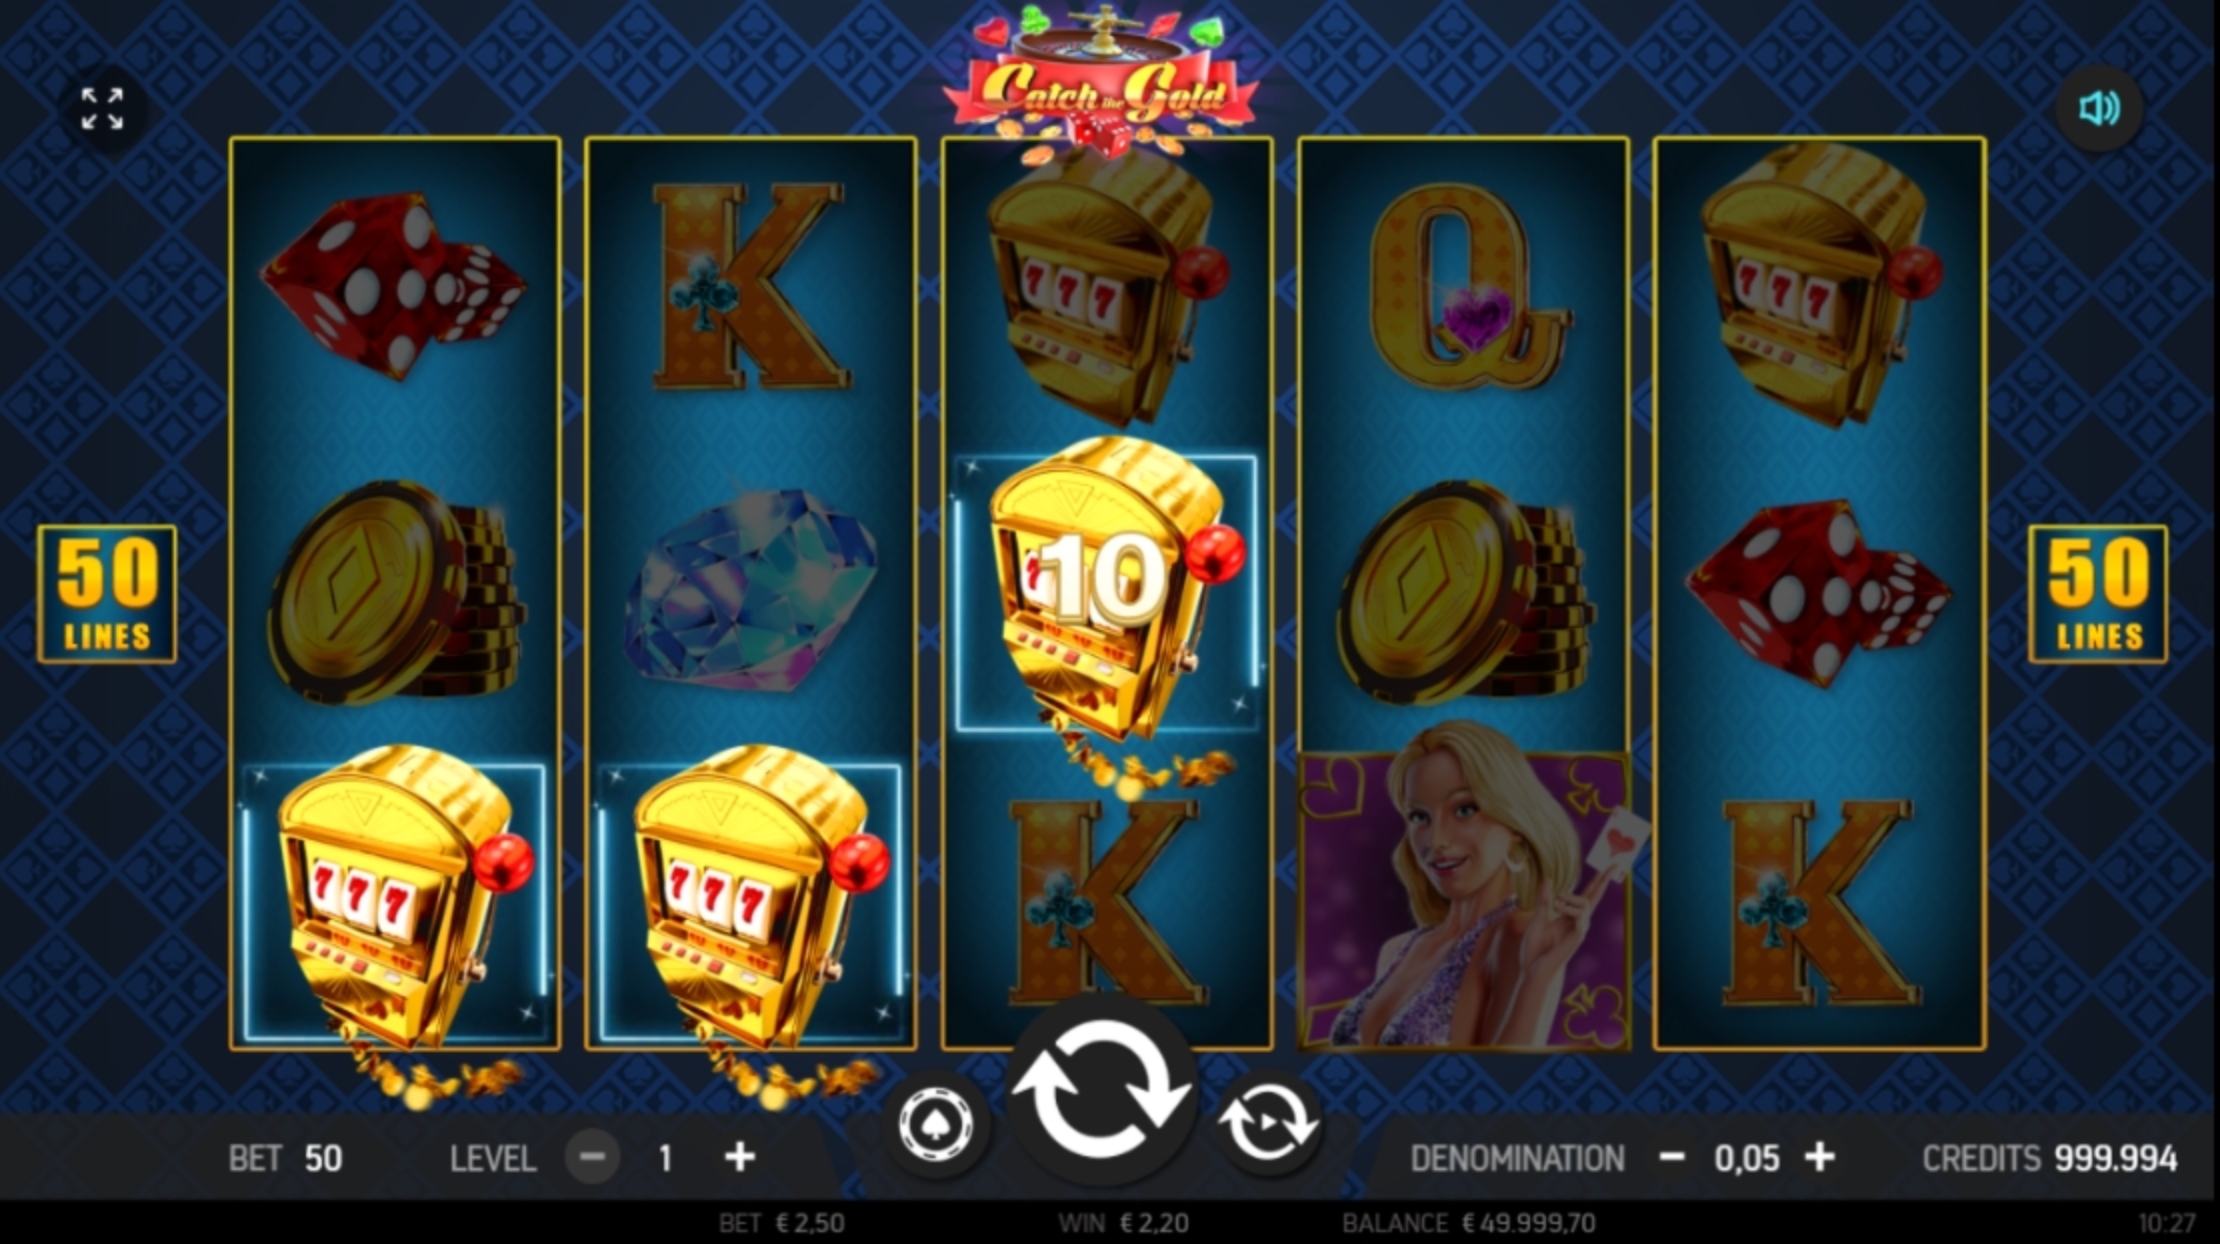 Win Money in Catch the Gold Free Slot Game by FBM